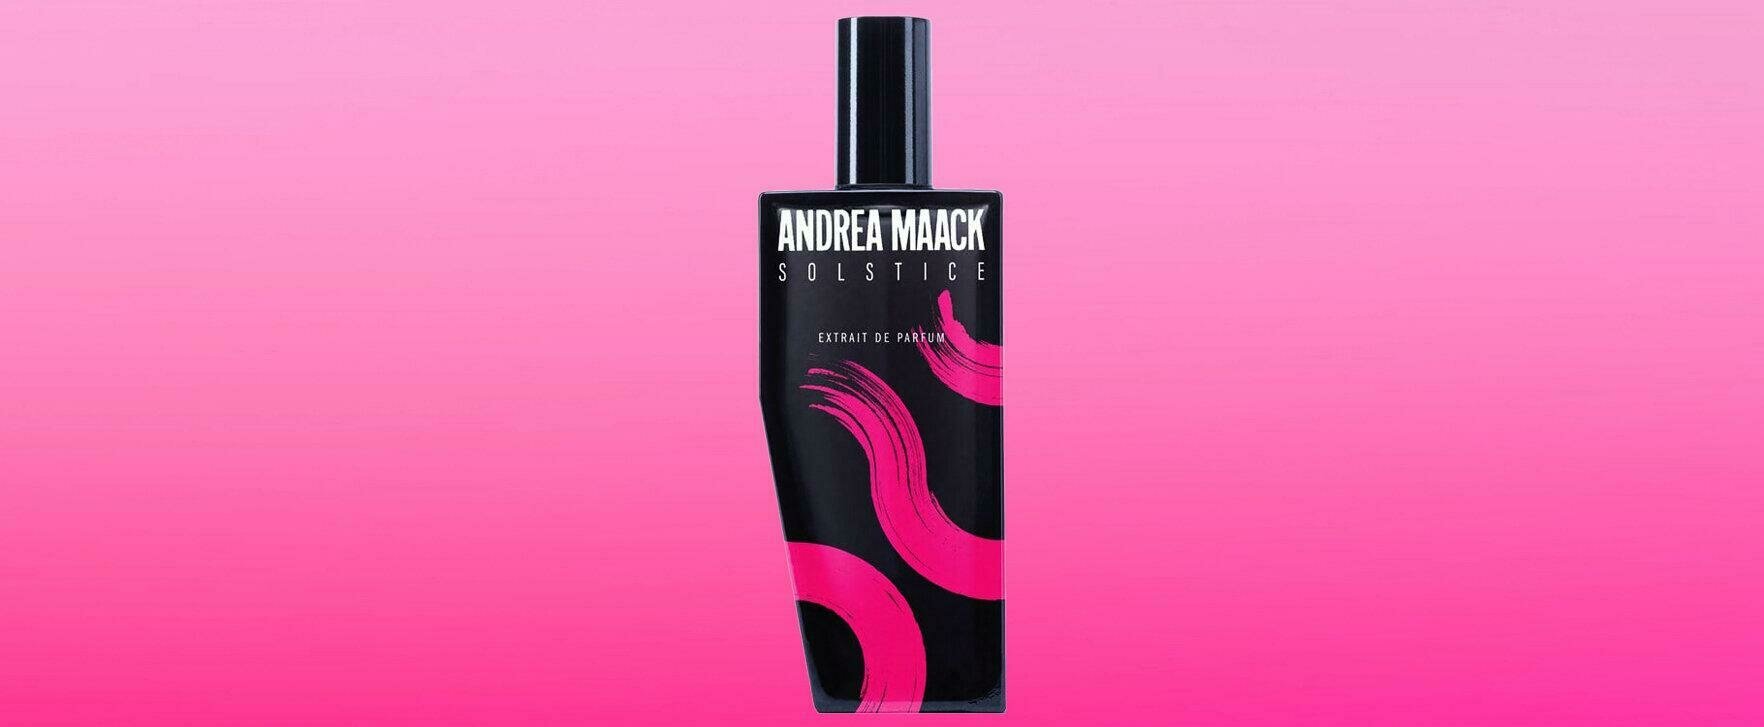 Solstice: The New Limited Sweet-Aquatic Fragrance Novelty by Andrea Maack